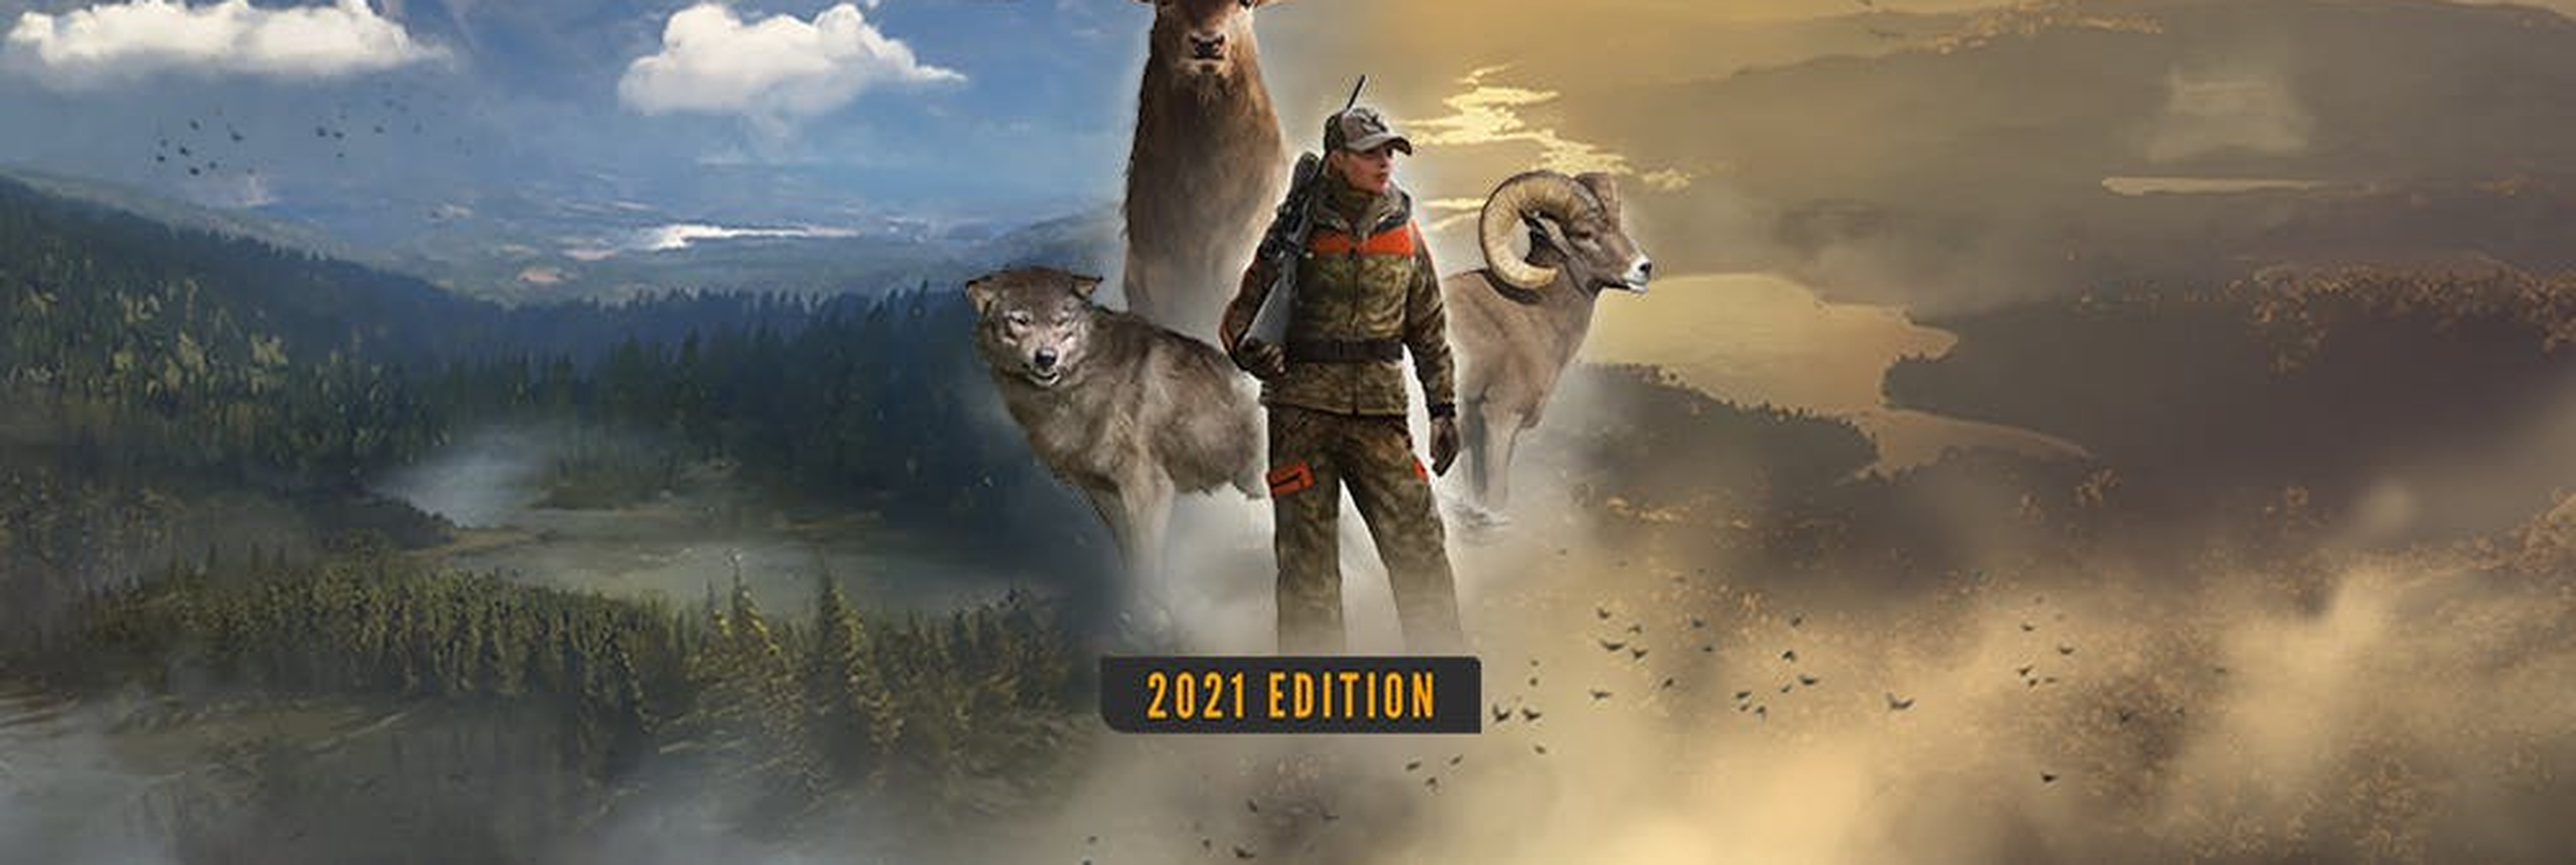 How long is The Hunter: Call of the Wild?